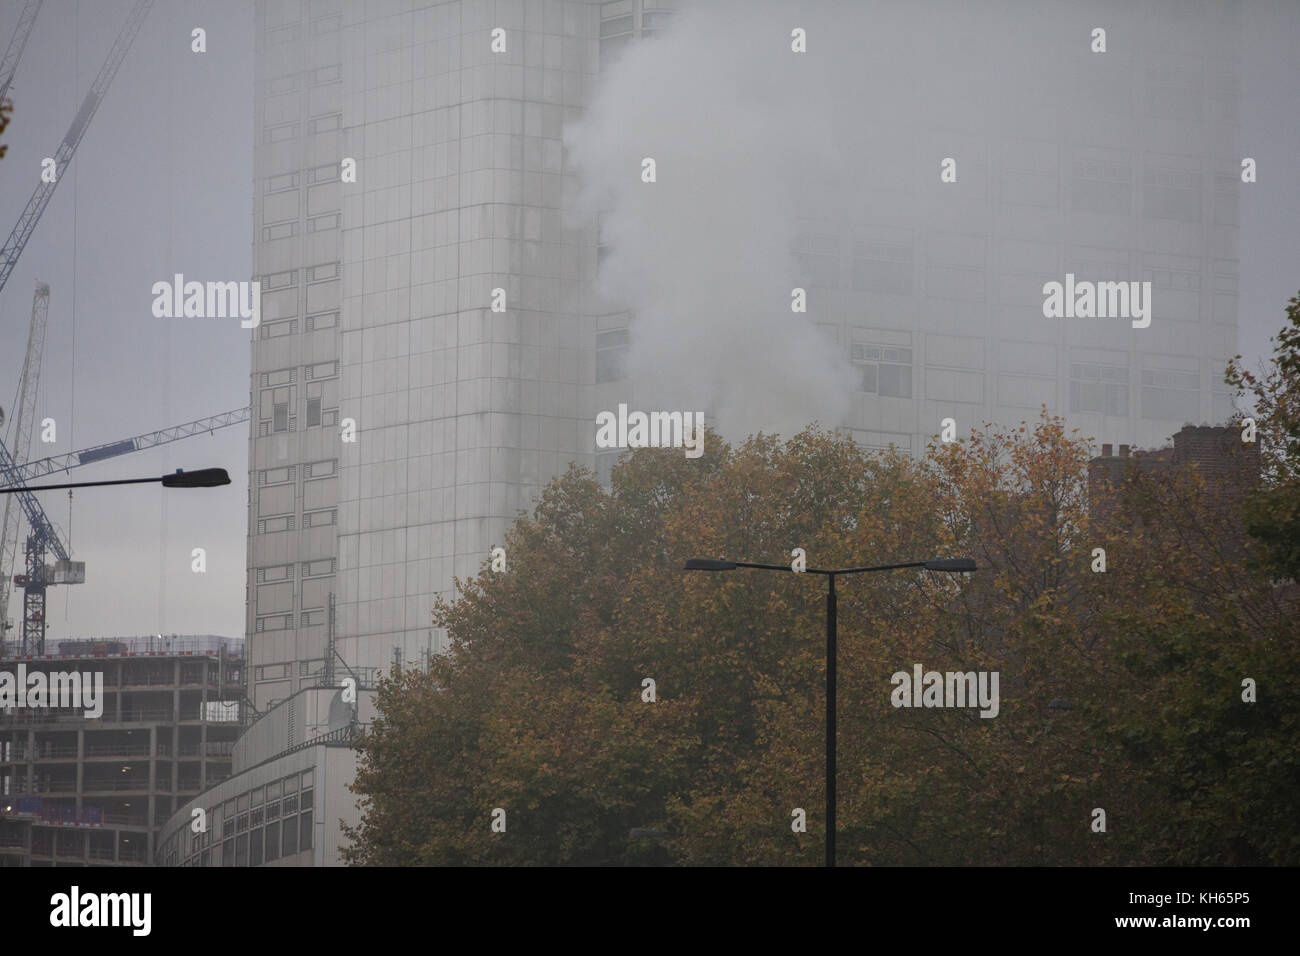 London, UK. 14th Nov, 2017. Acrid smoke rises from the roof of a tower block on Marylebone Road close to Edgware Road tube station. London Fire Brigade appliances attended the fire. Credit: Mark Kerrison/Alamy Live News Stock Photo